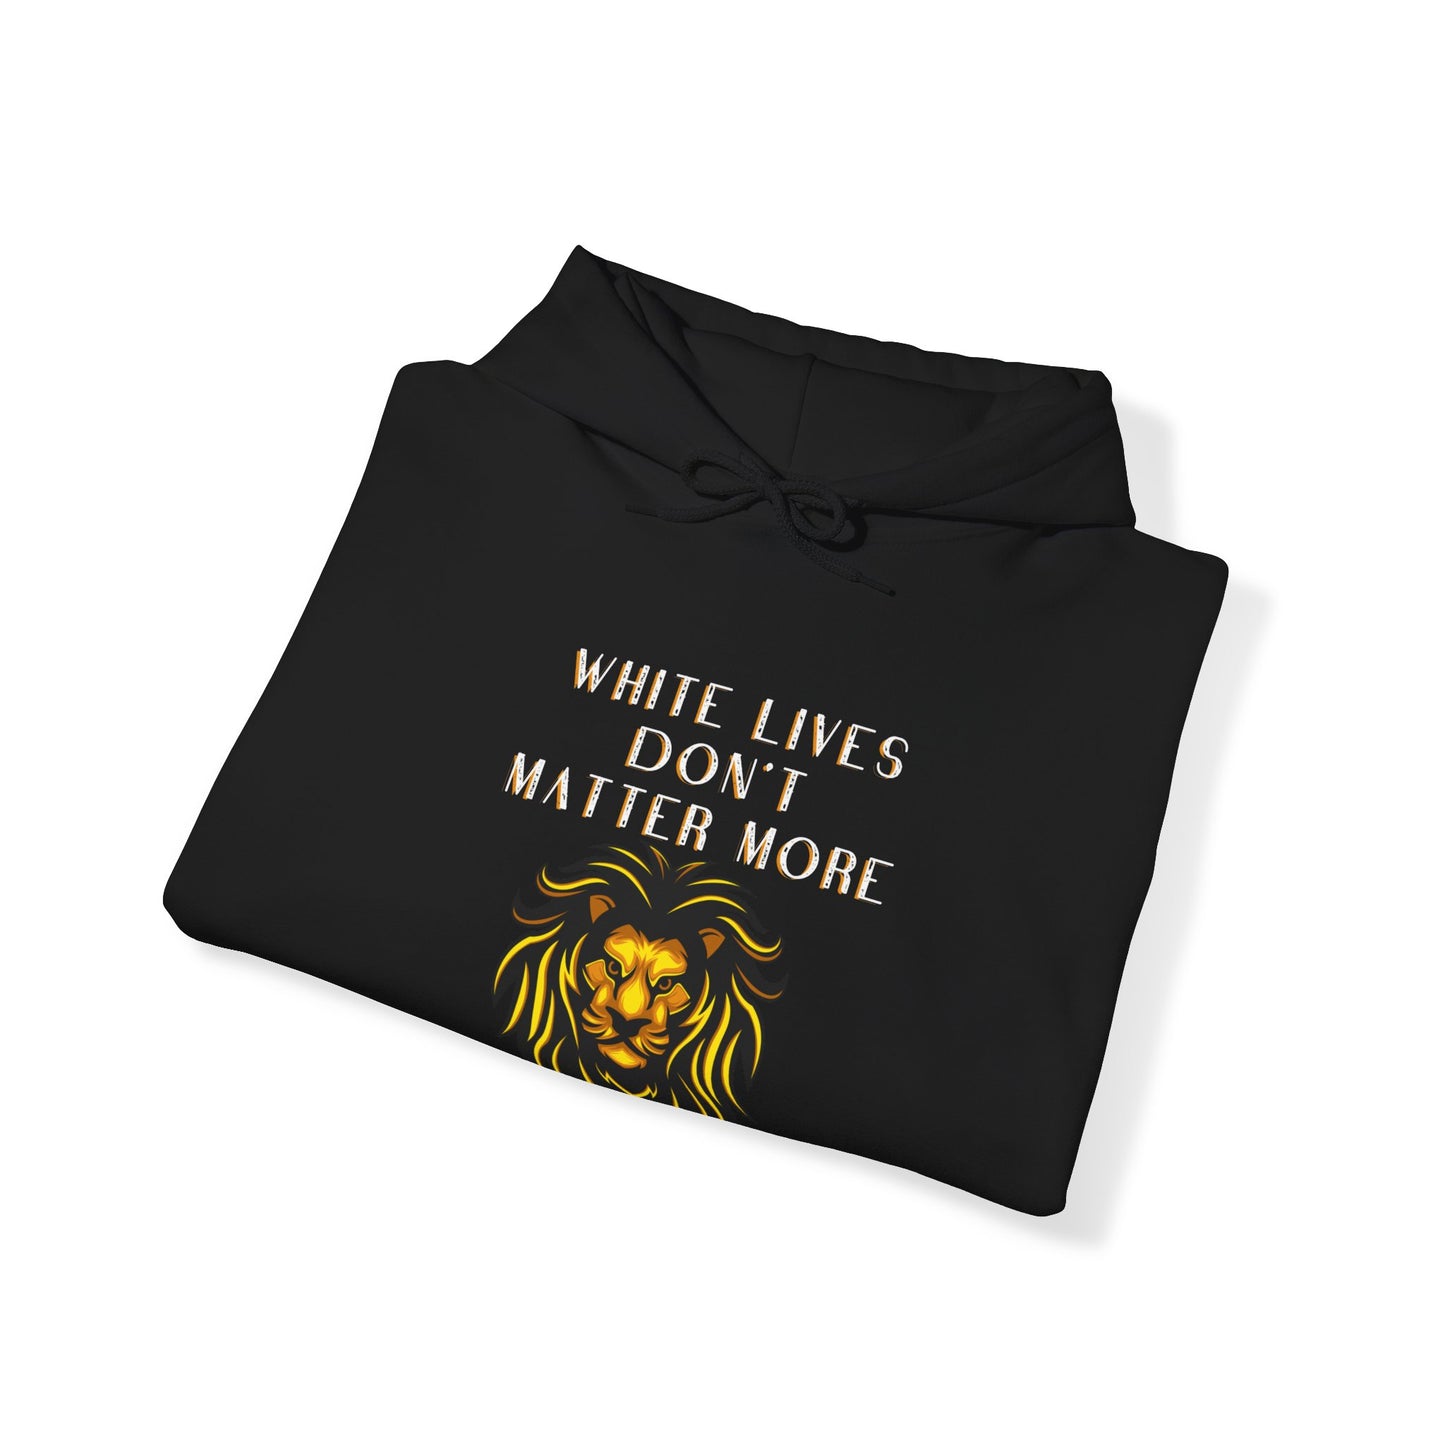 "White Lives Don't Matter More" Hooded Heavy Blend Sweatshirt (with Heavy Text and Graphic)